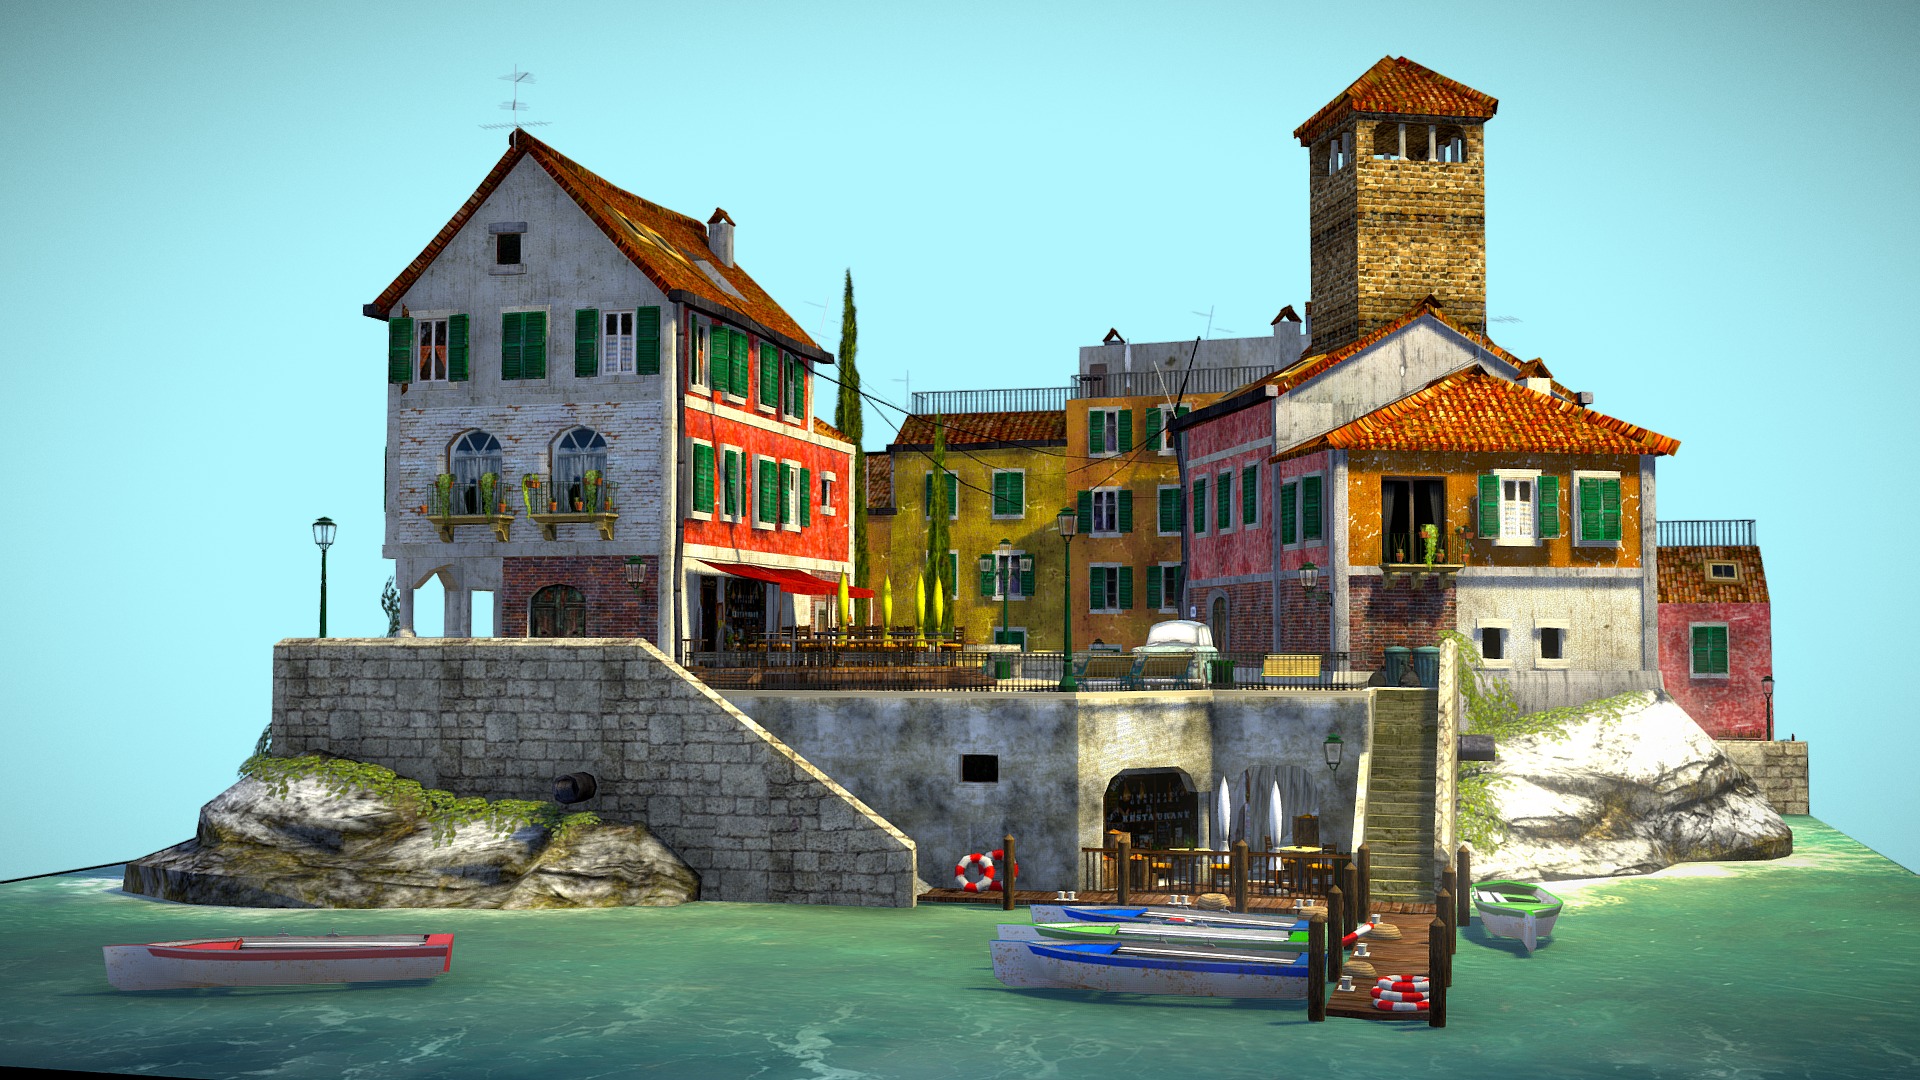 3D model Cinque Terre - This is a 3D model of the Cinque Terre. The 3D model is about a group of buildings next to a body of water.